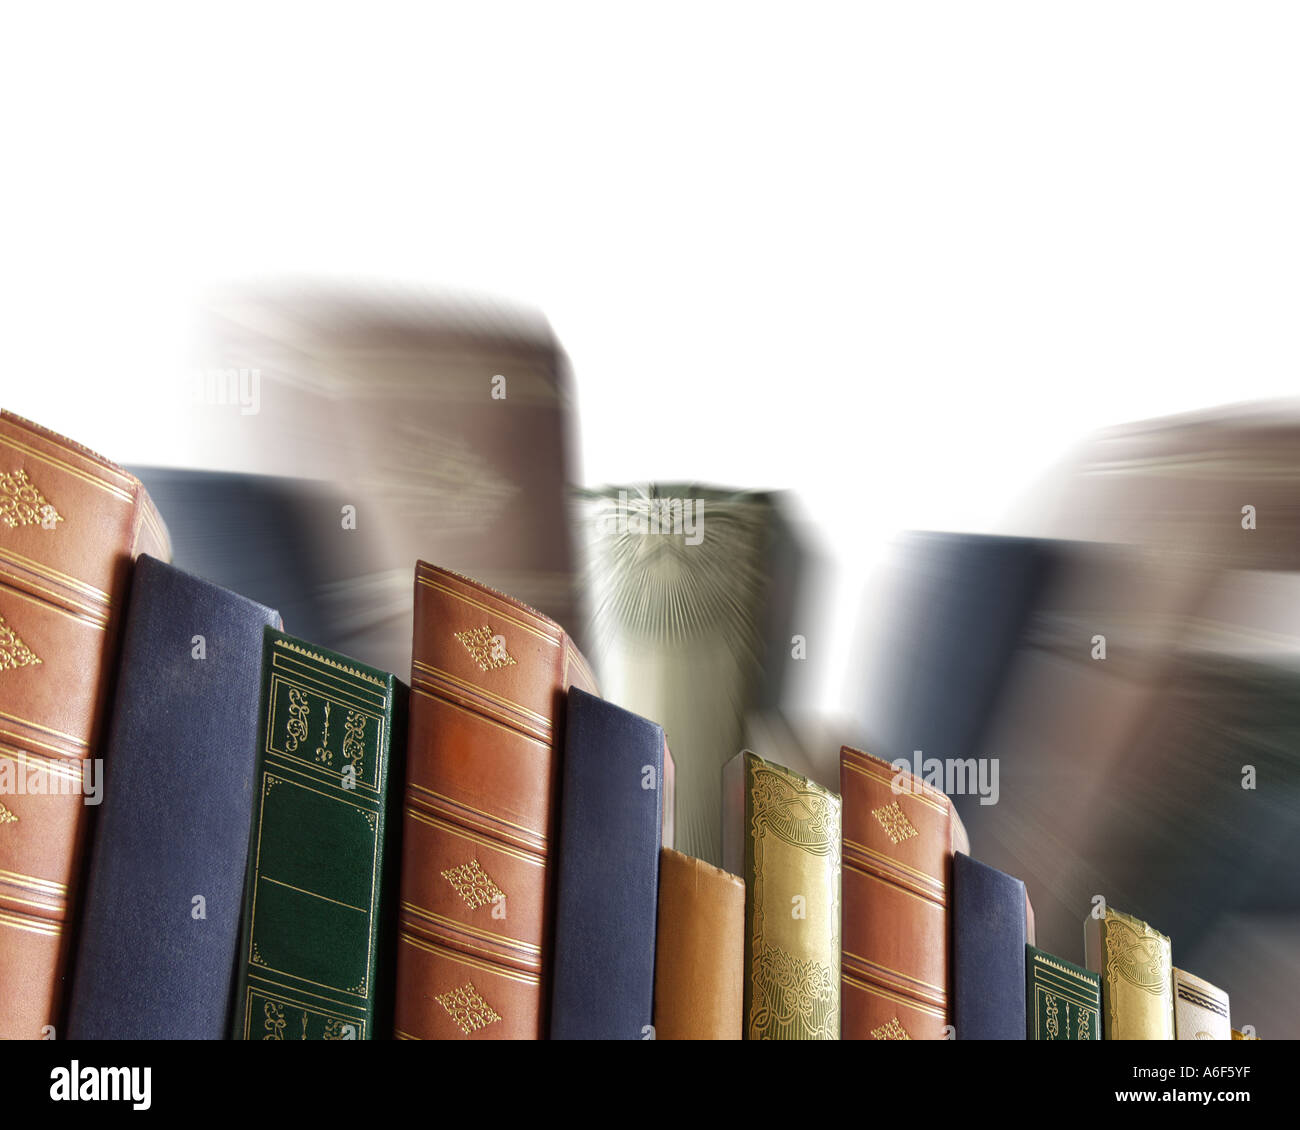 CONCEPT PHOTOGRAPHY:  Collection of Books Stock Photo